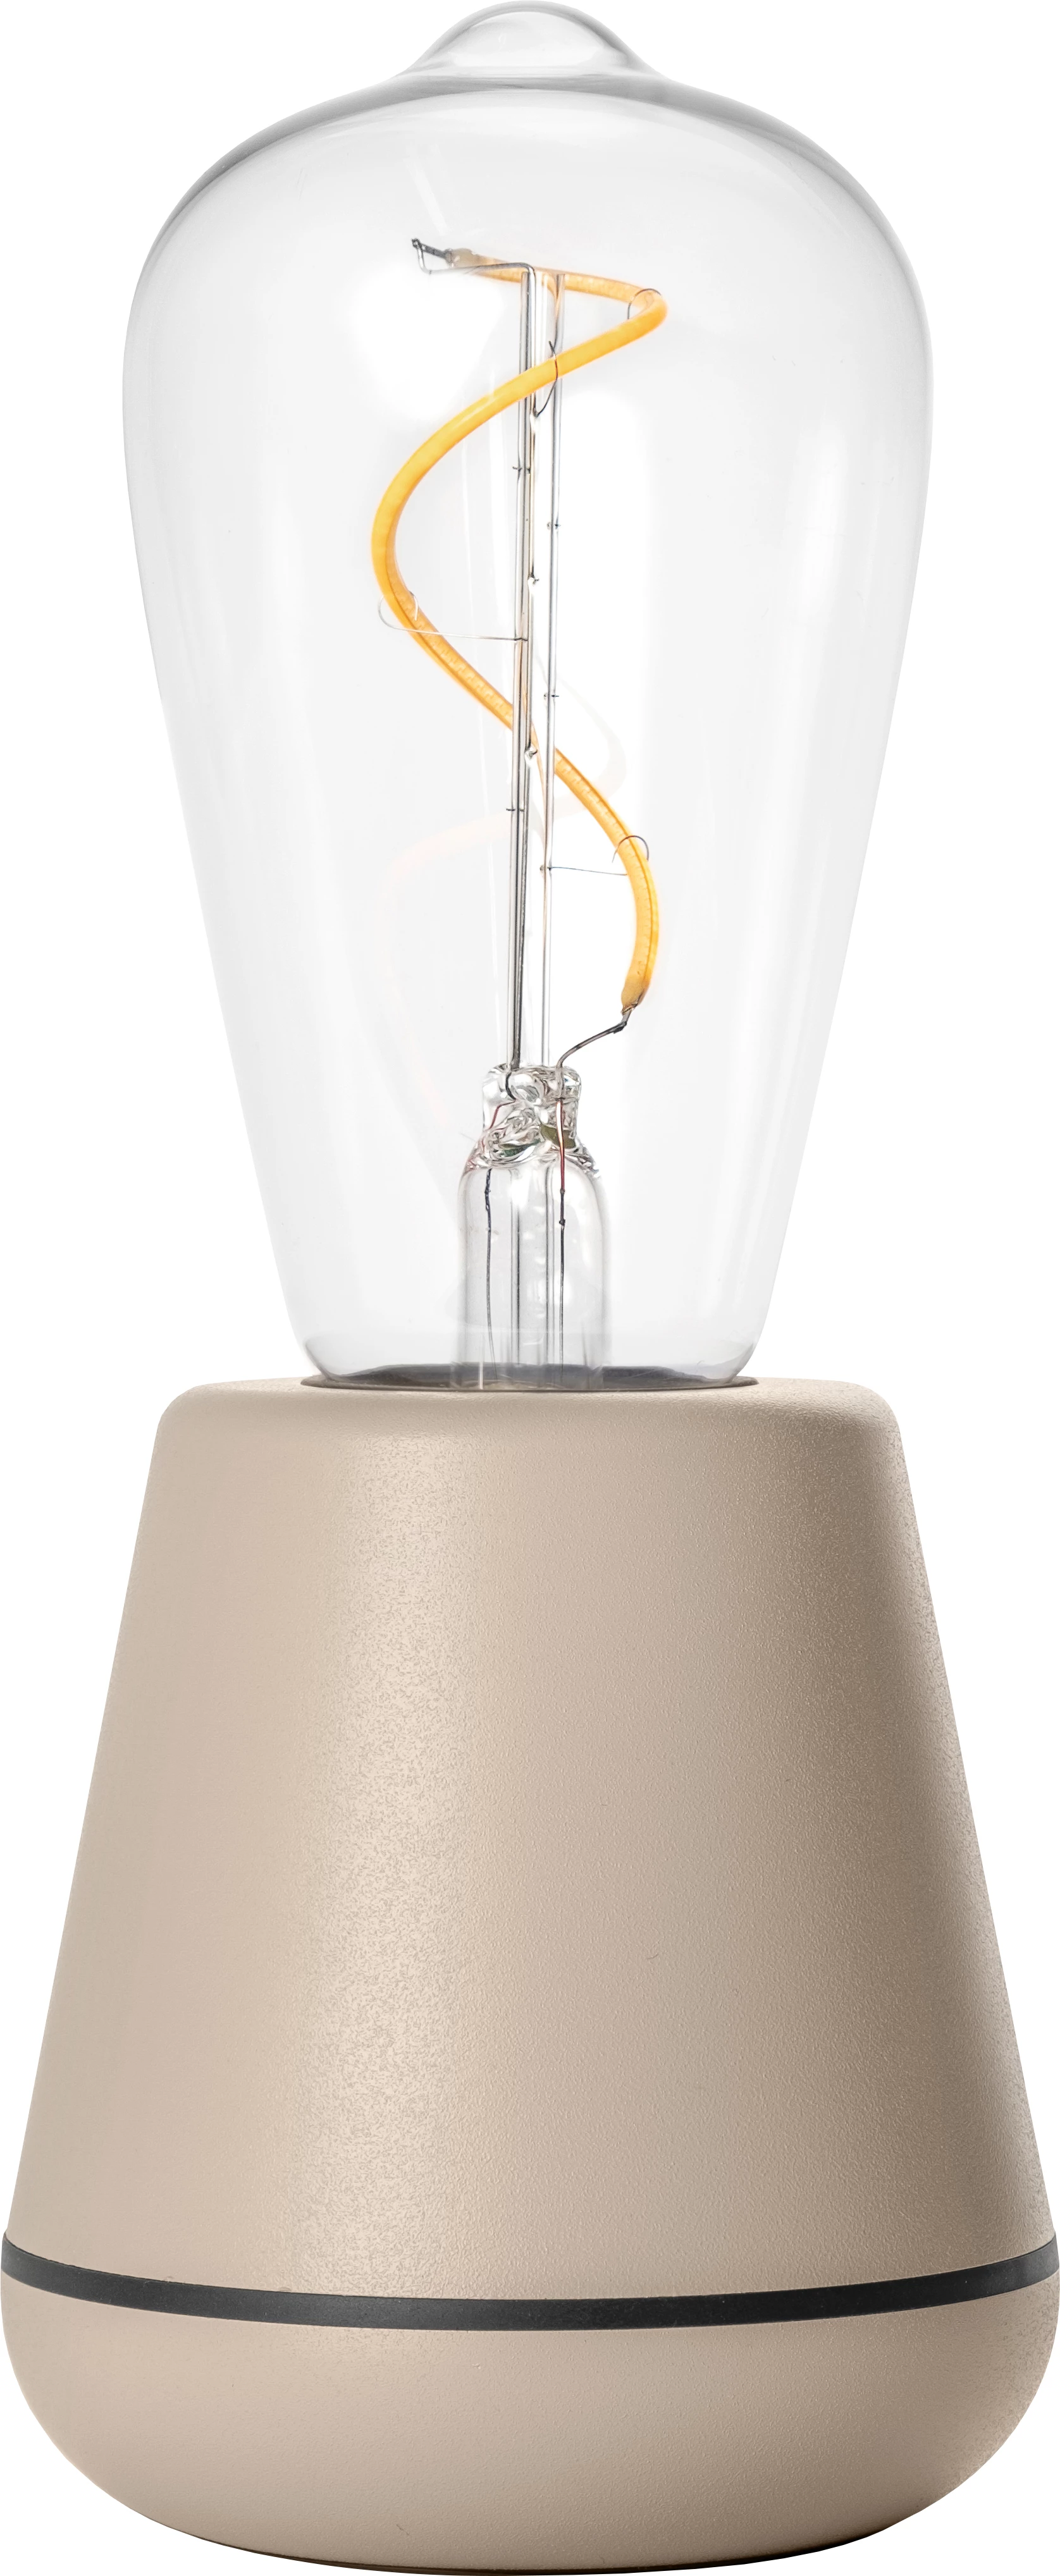 Humble One lampe, sand, H19,5 cm